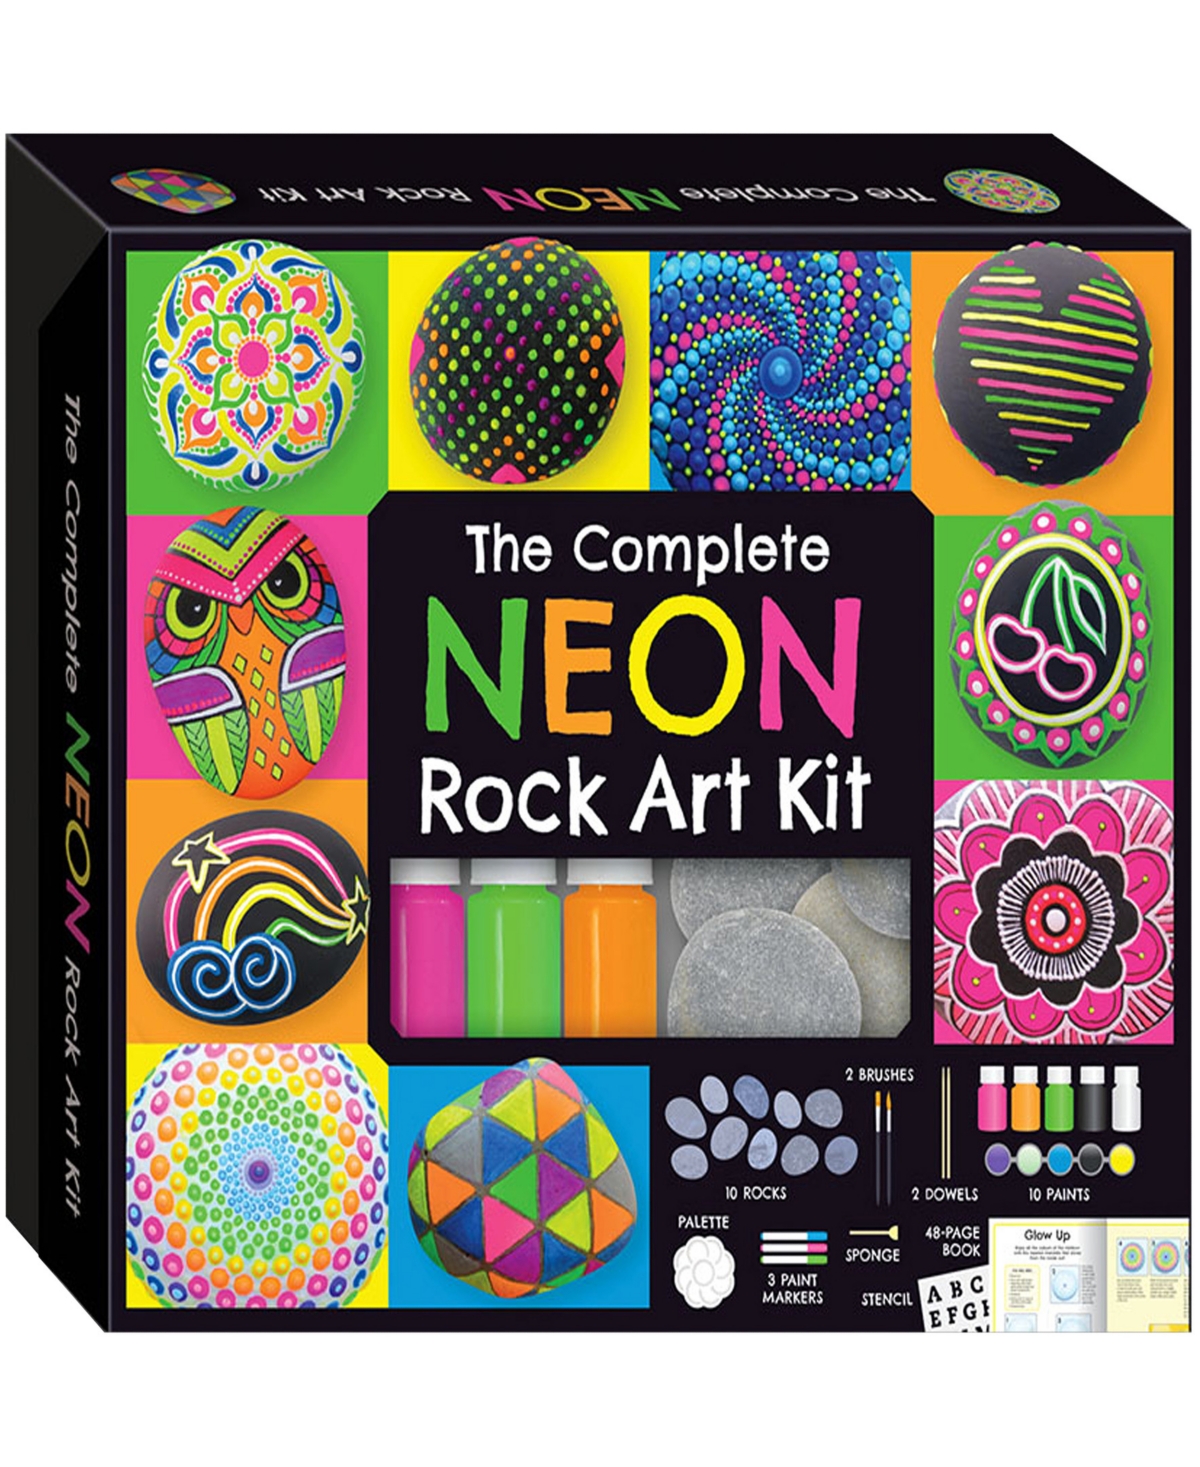 Craft Maker The Complete Neon Rock Art Kit Diy Rock Painting For Kids, Rocks, Brushes, Paint, Stencils Included In Multi